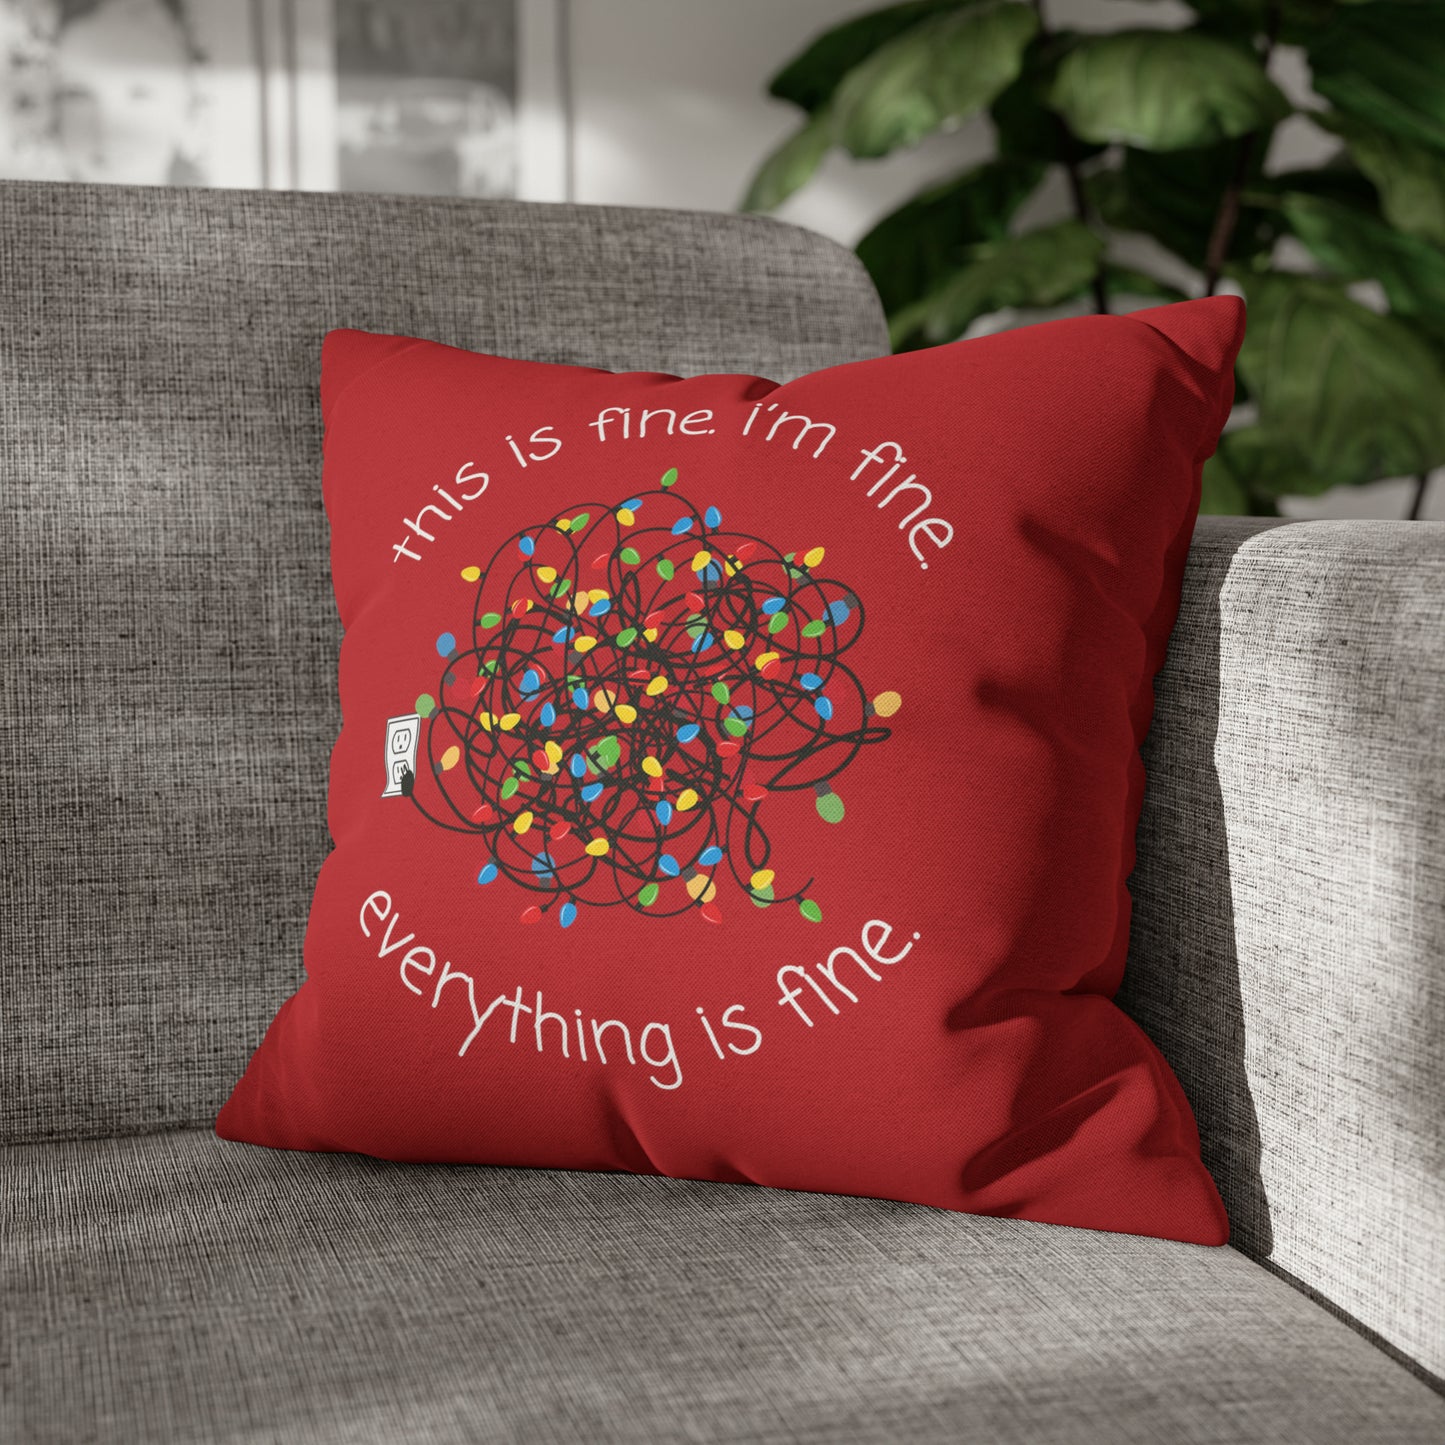 "Everything is Fine" Christmas Pillow Cover, Red